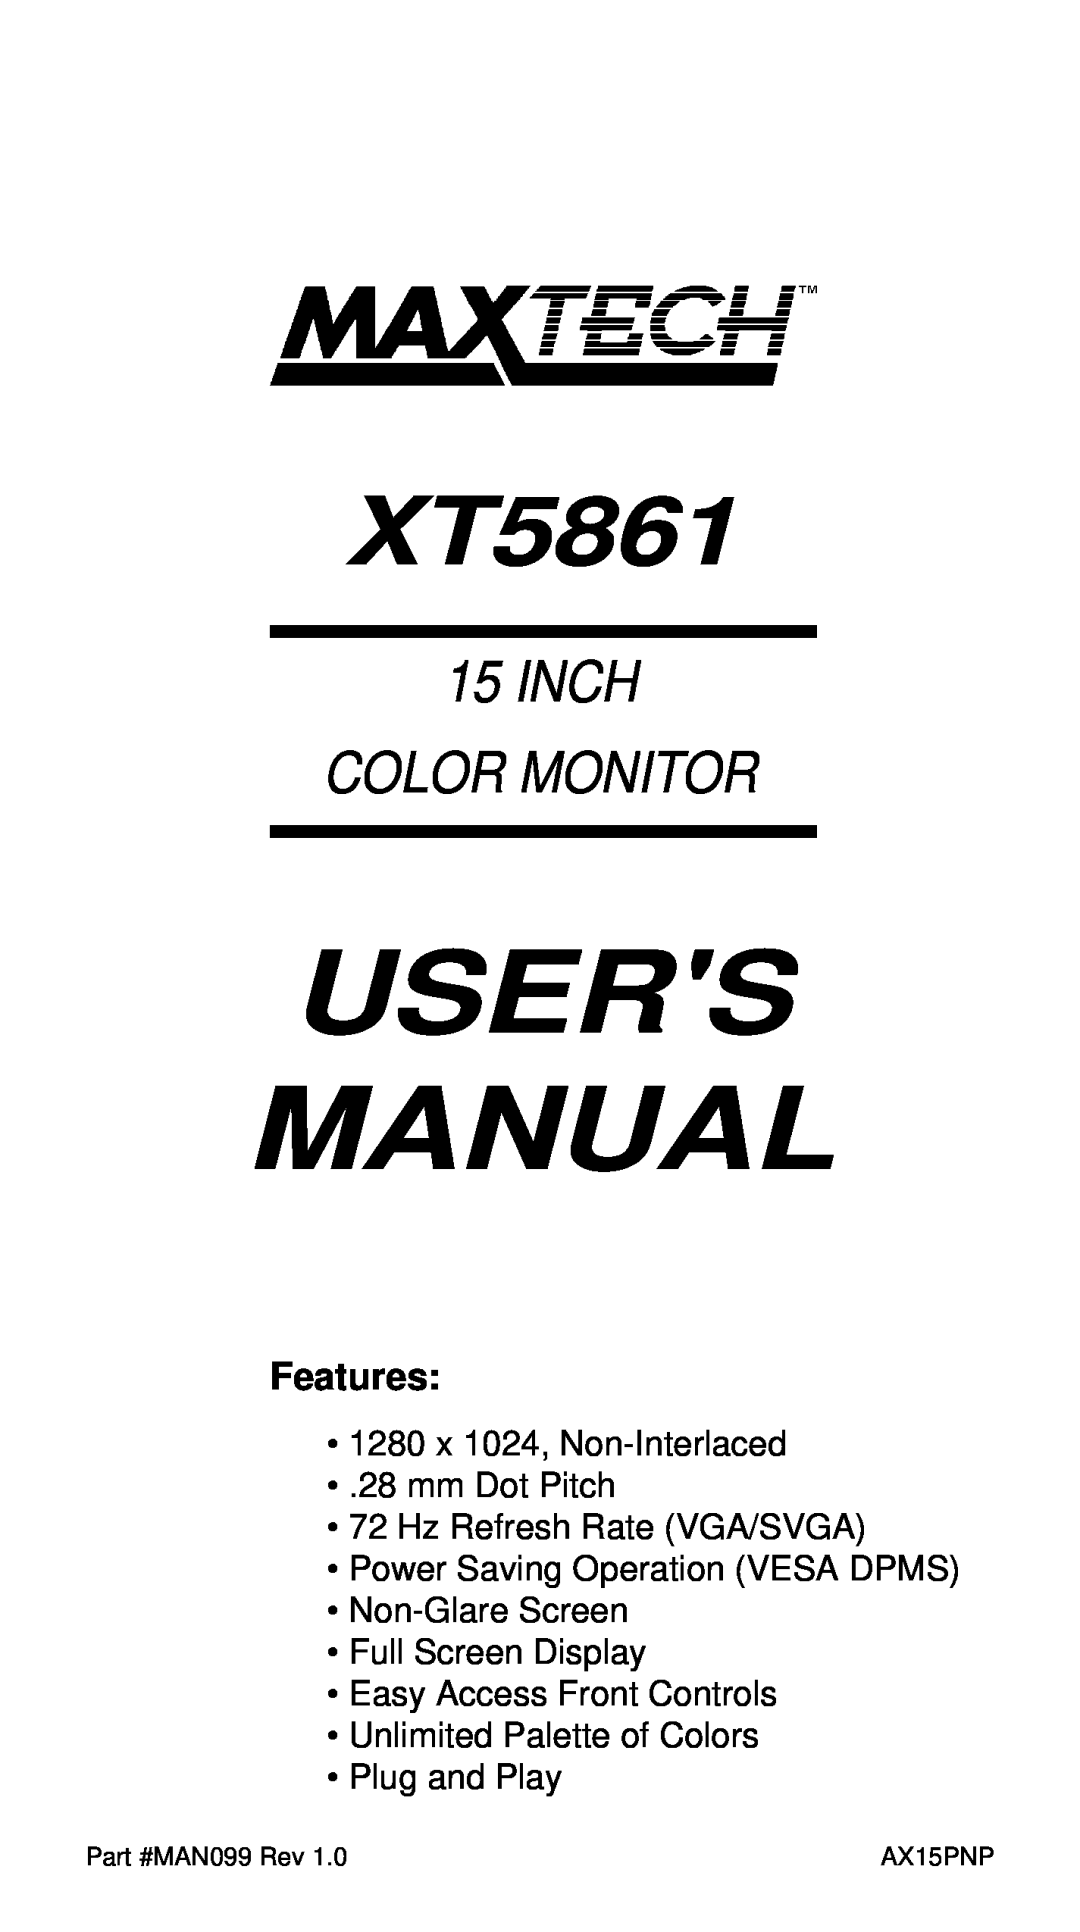 MaxTech XT5861 user manual Users Manual, Inch Color Monitor, Features, 1280 x 1024, Non-Interlaced 28 mm Dot Pitch 